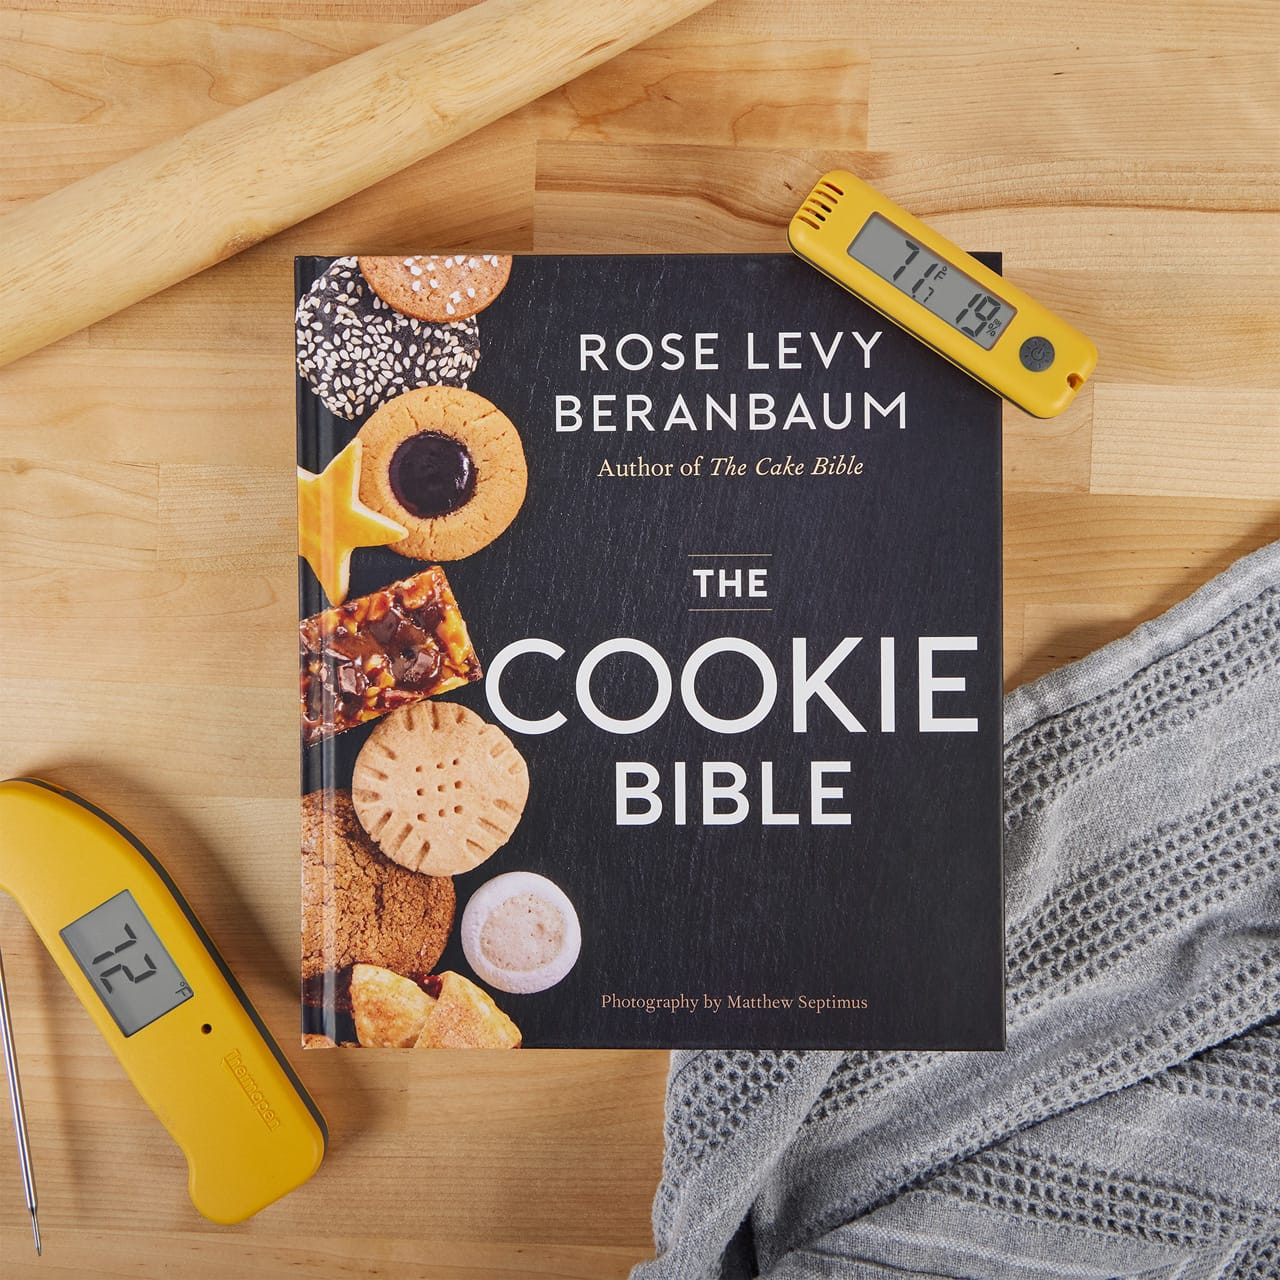 The Bread Bible by Rose Levy Beranbaum